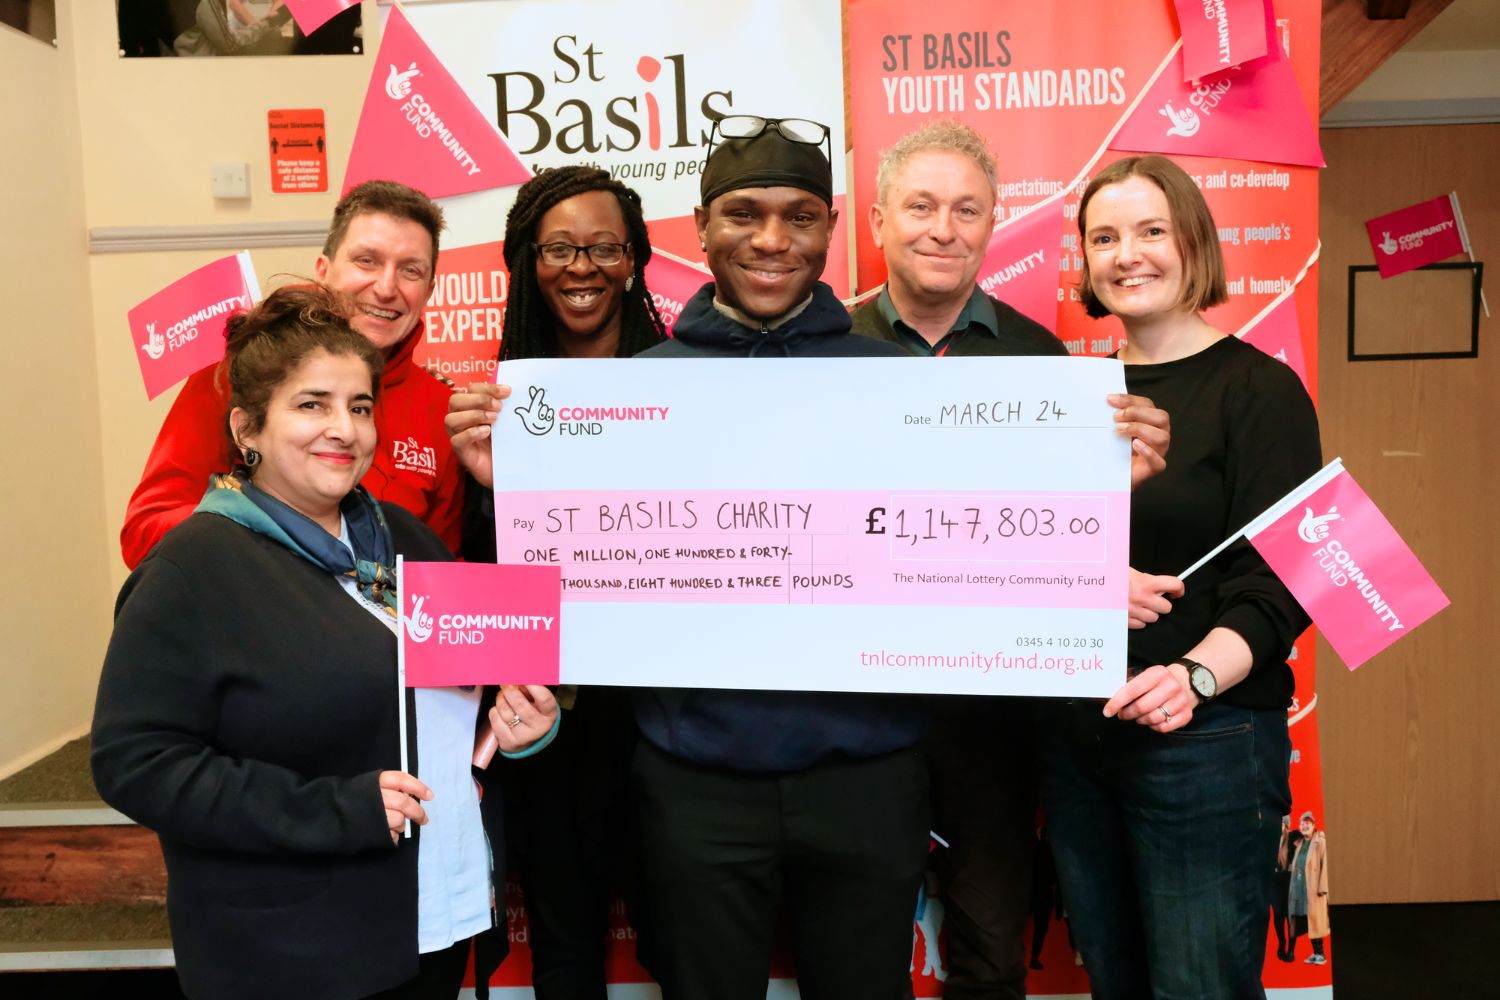 St Basils Receives Over a Million Pounds to Support Young People Back into Work